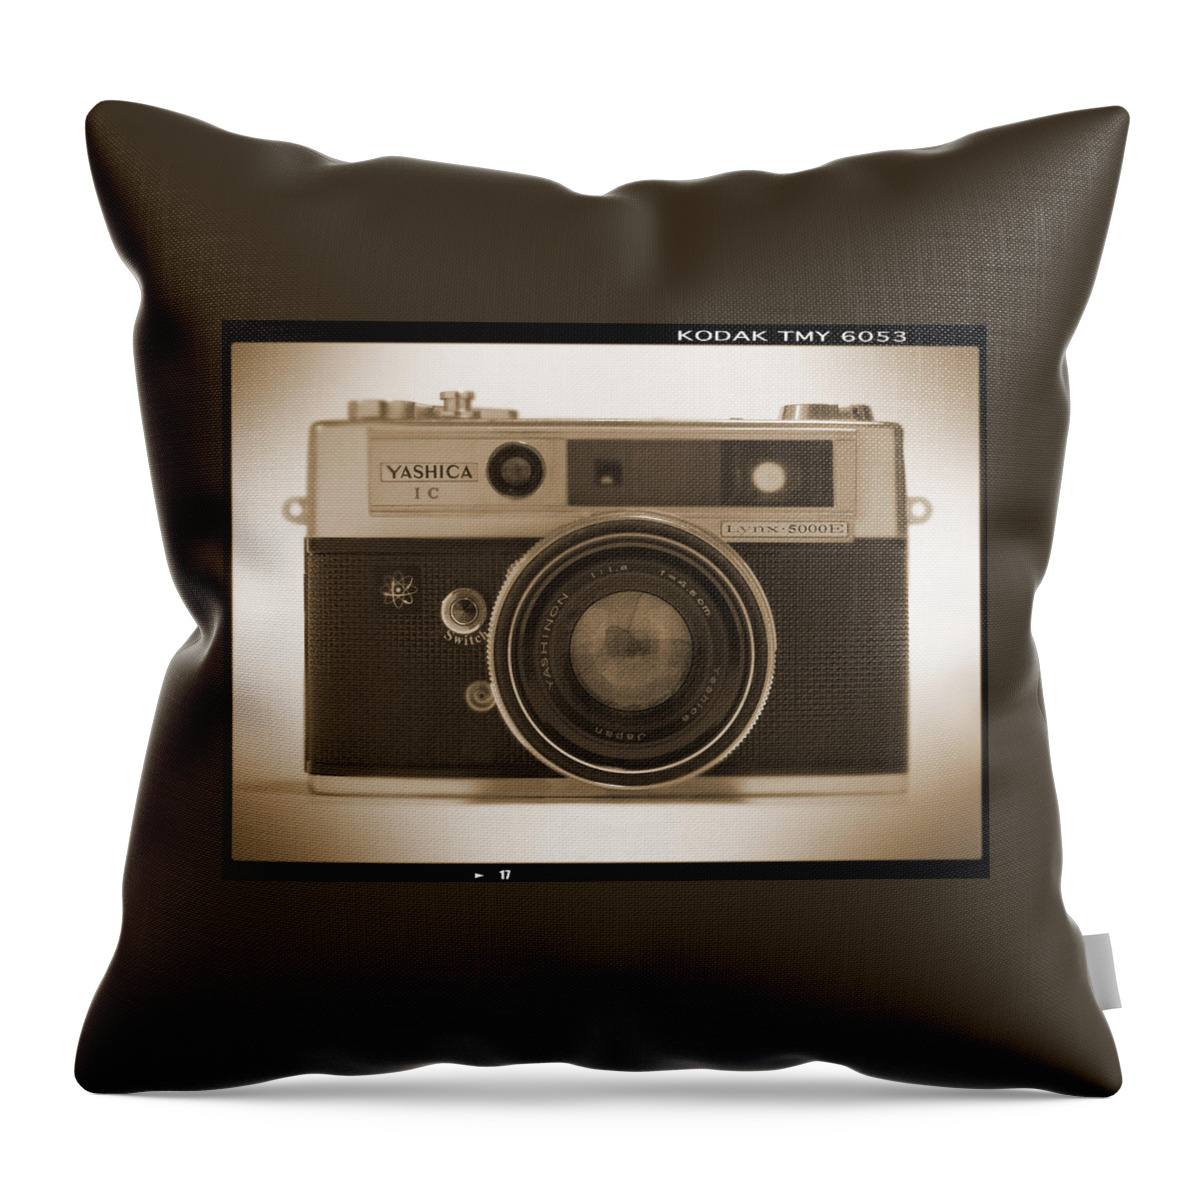 Classic Film Camera Throw Pillow featuring the photograph Yashica Lynx 5000E 35mm Camera by Mike McGlothlen